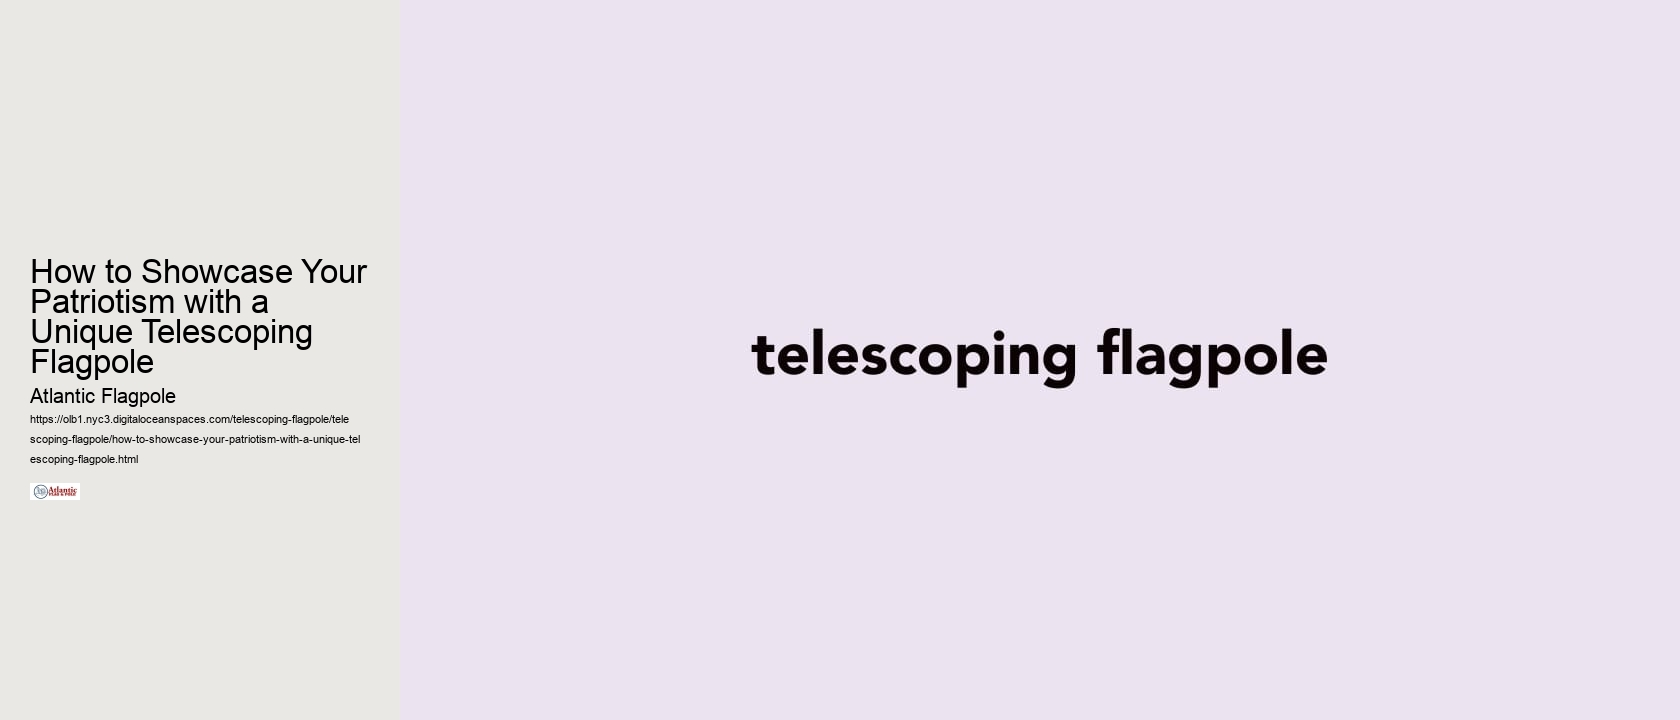 How to Showcase Your Patriotism with a Unique Telescoping Flagpole